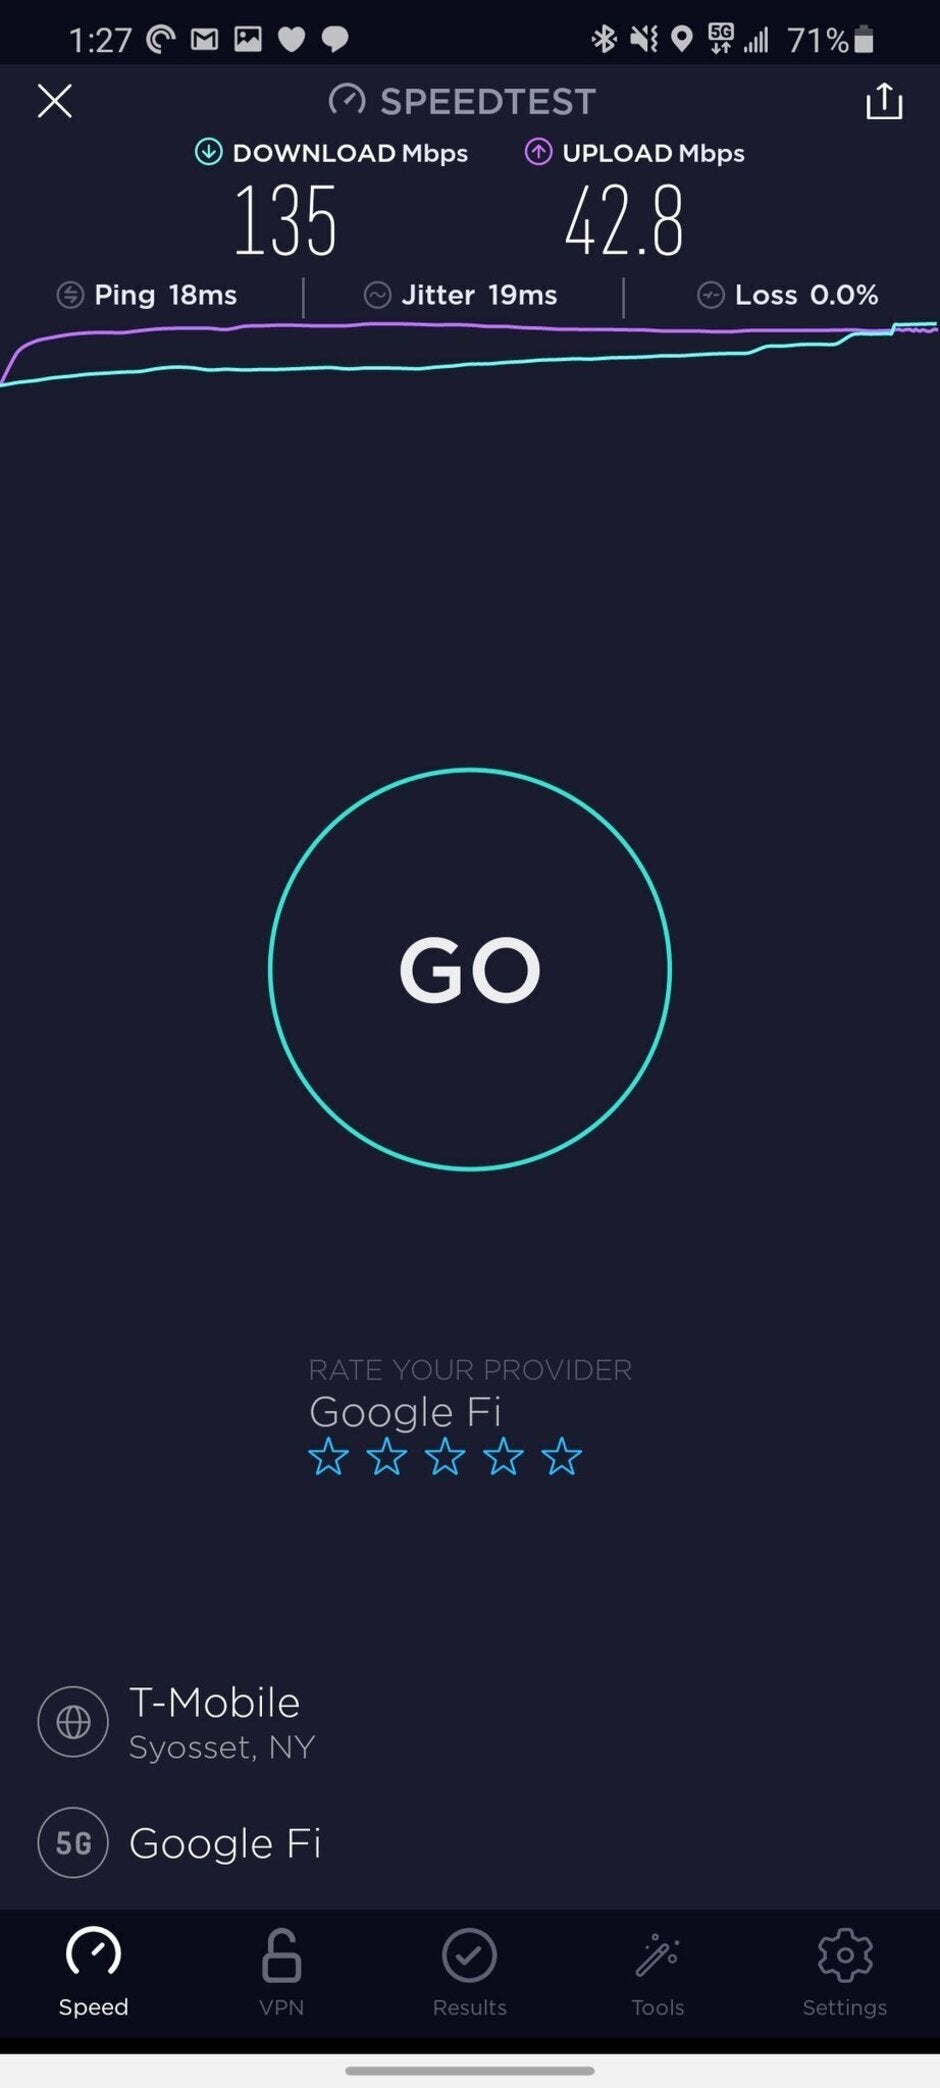 Google Fi customers can already use T-Mobile's 5G network